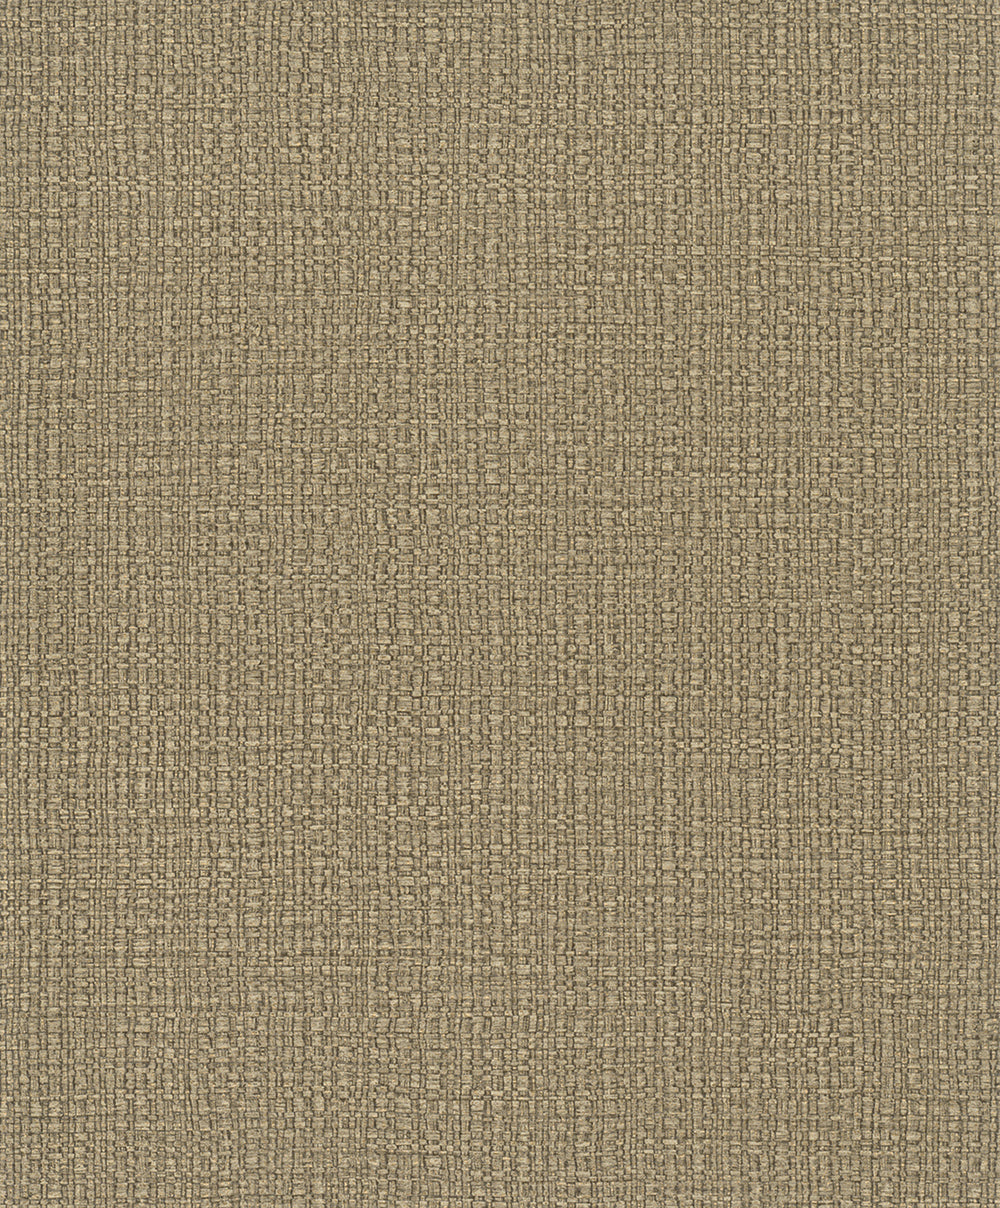 Vintage Deluxe - Textured Bamboo Weave bold wallpaper Marburg Roll Light Brown  32809